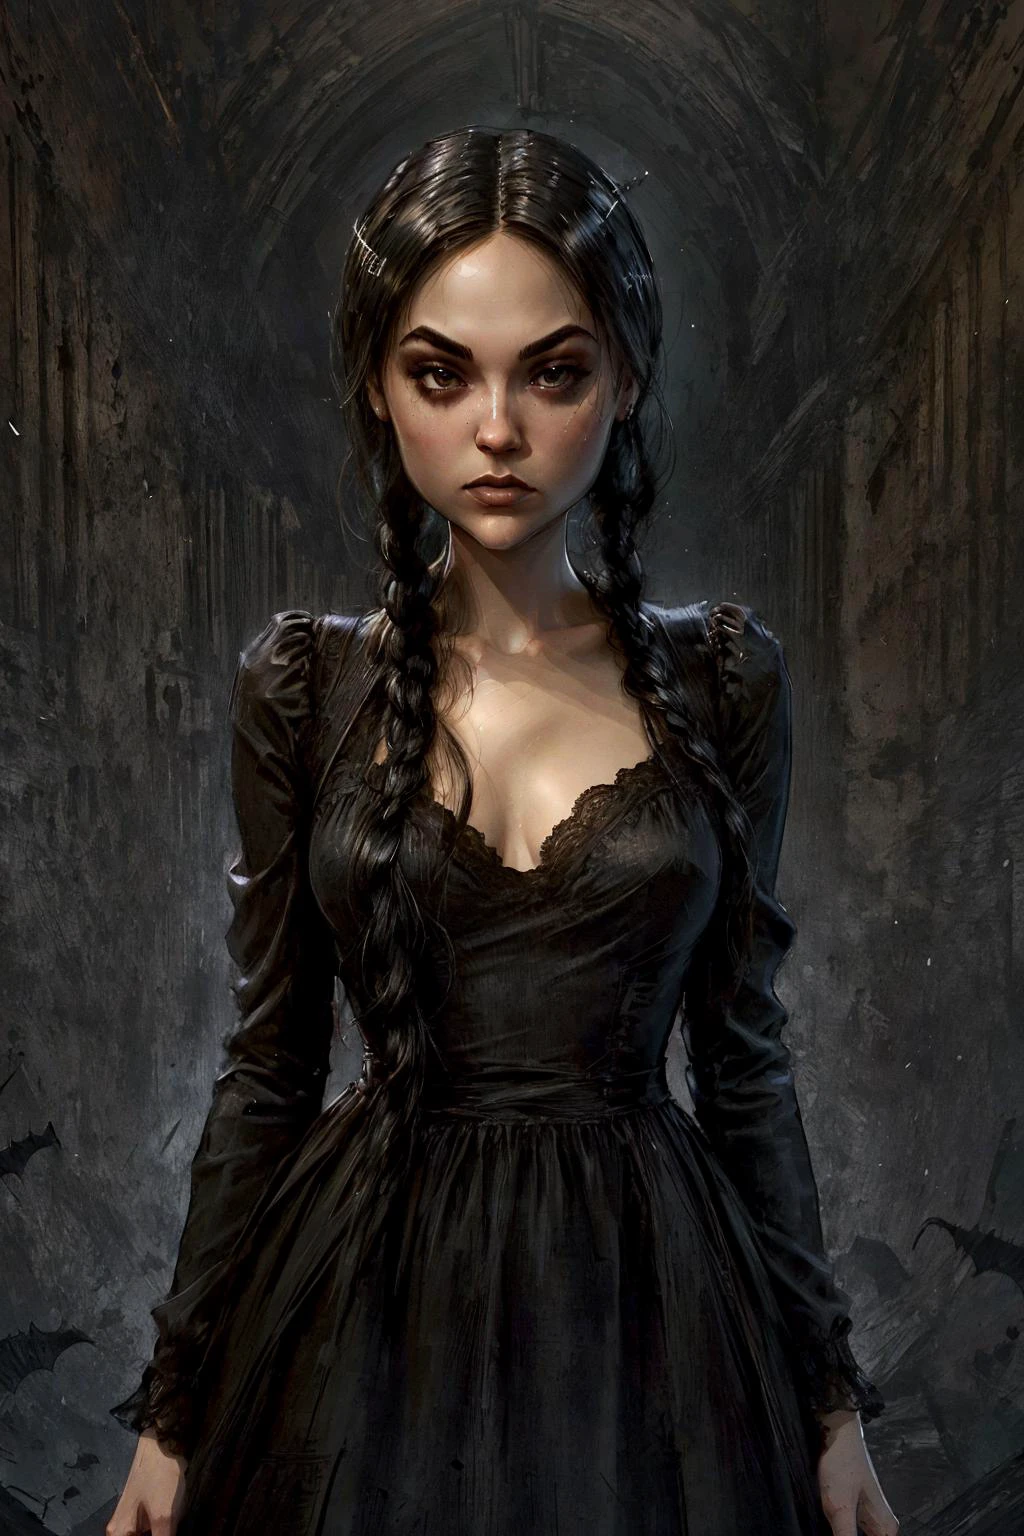 Generate a high-quality image of Wednesday Addams  (koh_sashagrey) during Halloween eve. She is standing on the grand, dimly lit staircase of an ancient, eerie, and gothic mansion. Wednesday is a tall, slim, and pale young woman with long, jet-black hair, almost reaching her waist. Her hair is straight and perfectly styled, framing her beautiful, oval face. She has large, expressive, and slightly melancholic dark brown eyes that give her an enigmatic look. Her skin is porcelain white, and she has a delicate, pointed nose.
Wednesday is dressed in a revealing, skin-tight black dress that accentuates her alluring figure. The dress features intricate details that blend seamlessly with the gothic aesthetic. Her attire is both fashionable and macabre, perfectly capturing her unique style.
The setting should exude a spooky, atmospheric vibe, with flickering candlelight, cobwebs, and hauntingly elegant décor. It's a perfect scene for a Halloween celebration. The overall image should capture her iconic gothic charm and the macabre ambiance of the mansion. 